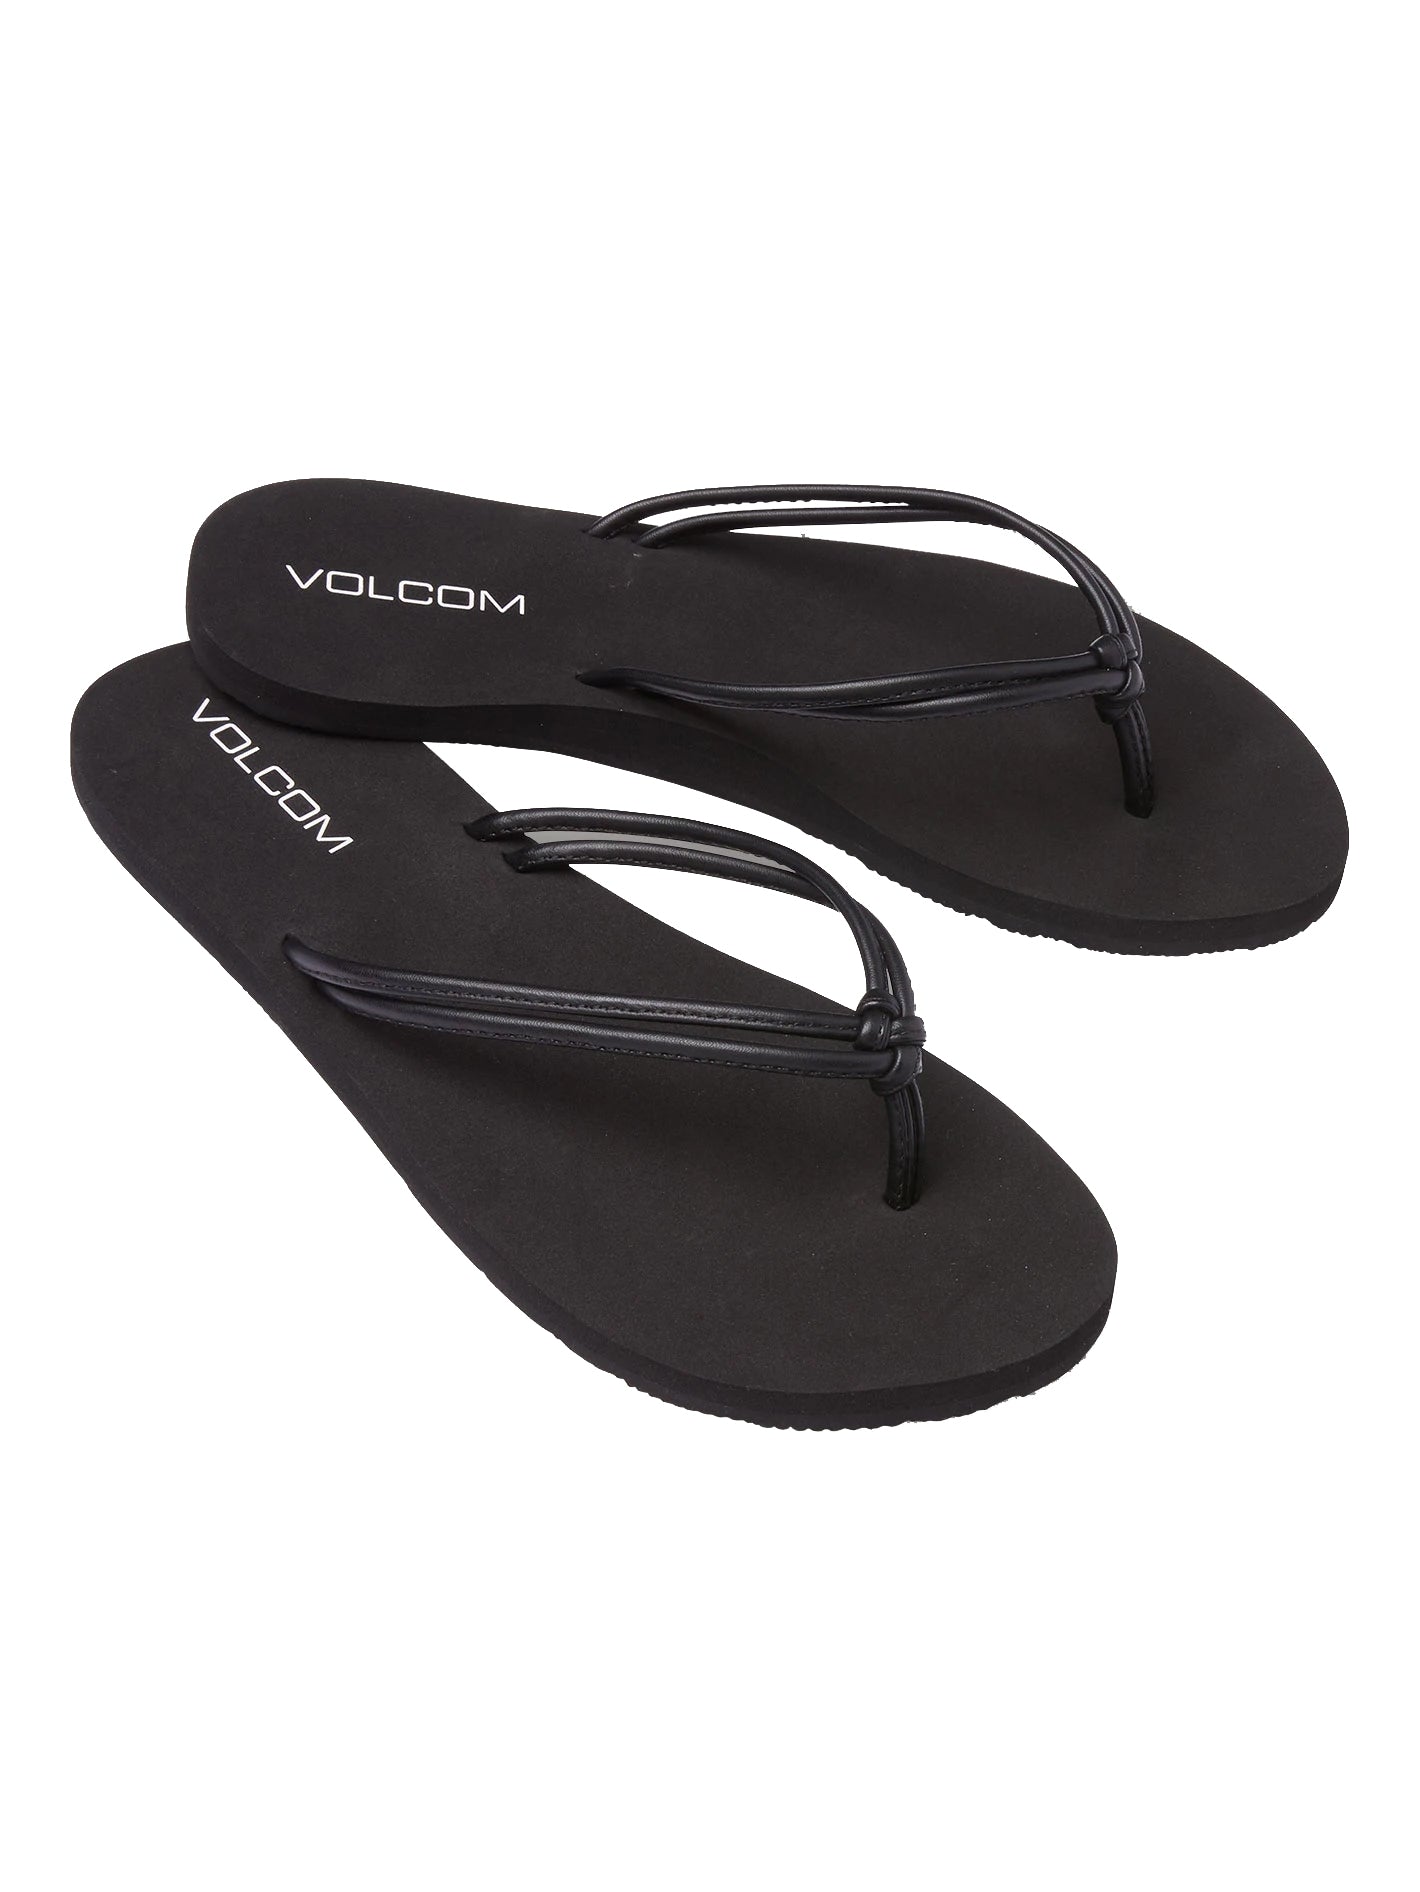 Volcom Forever and Ever 2 Womens Sandal BKO-Black Out 9